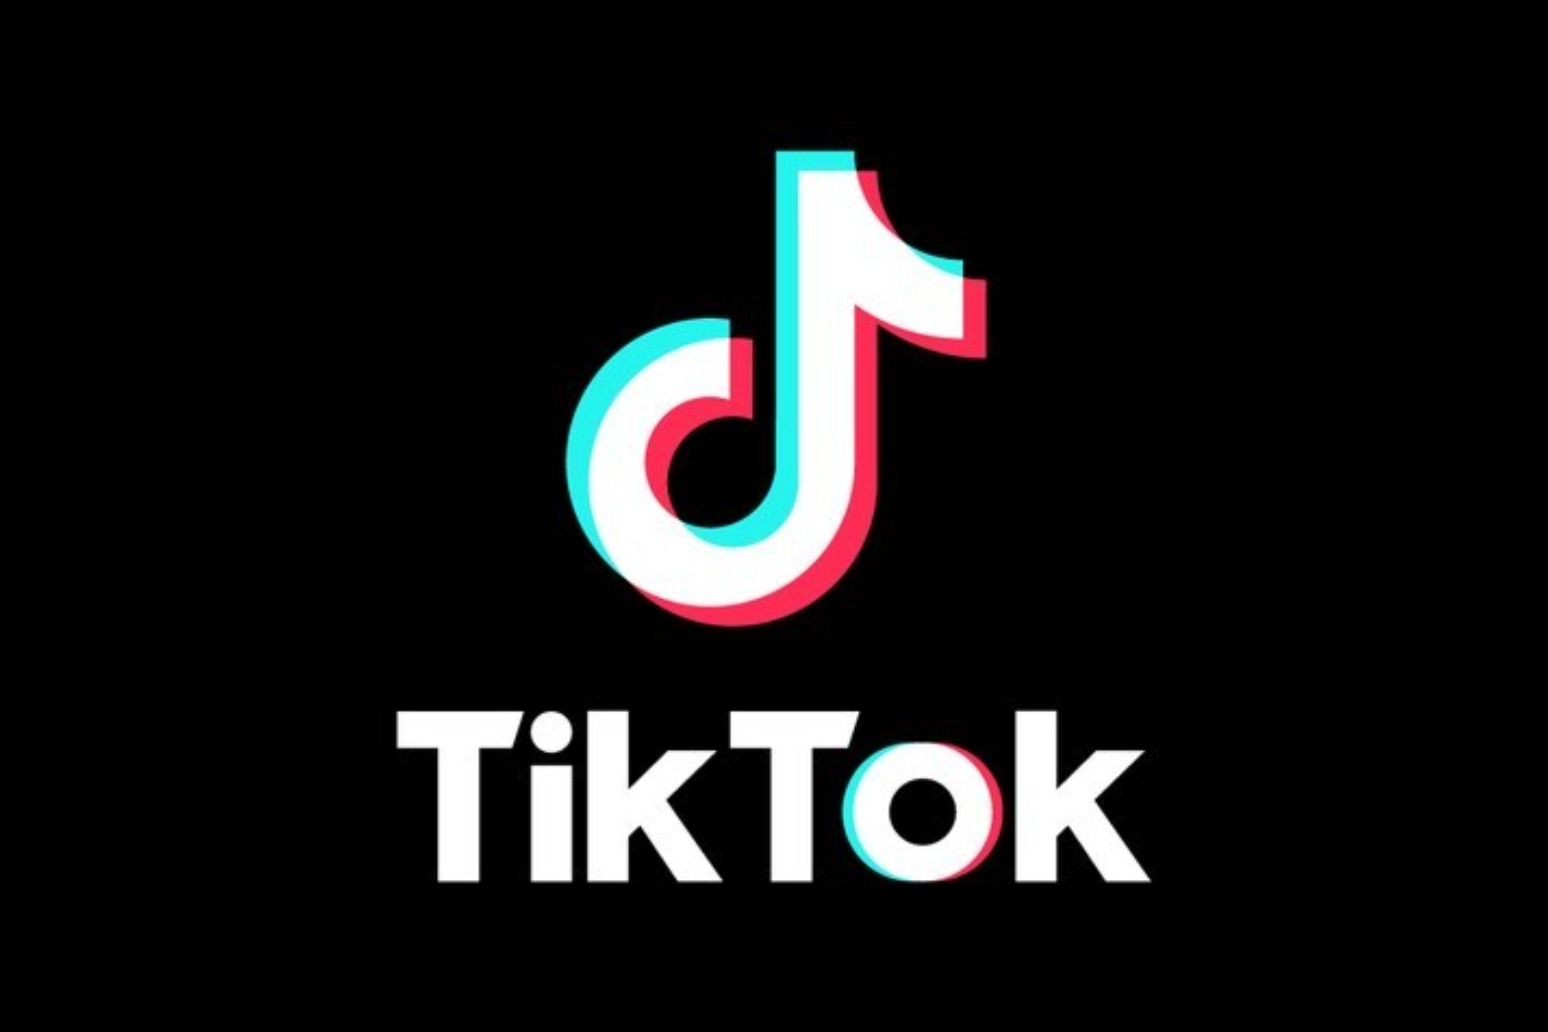 TikTok launches scheme aimed at tackling youth unemployment